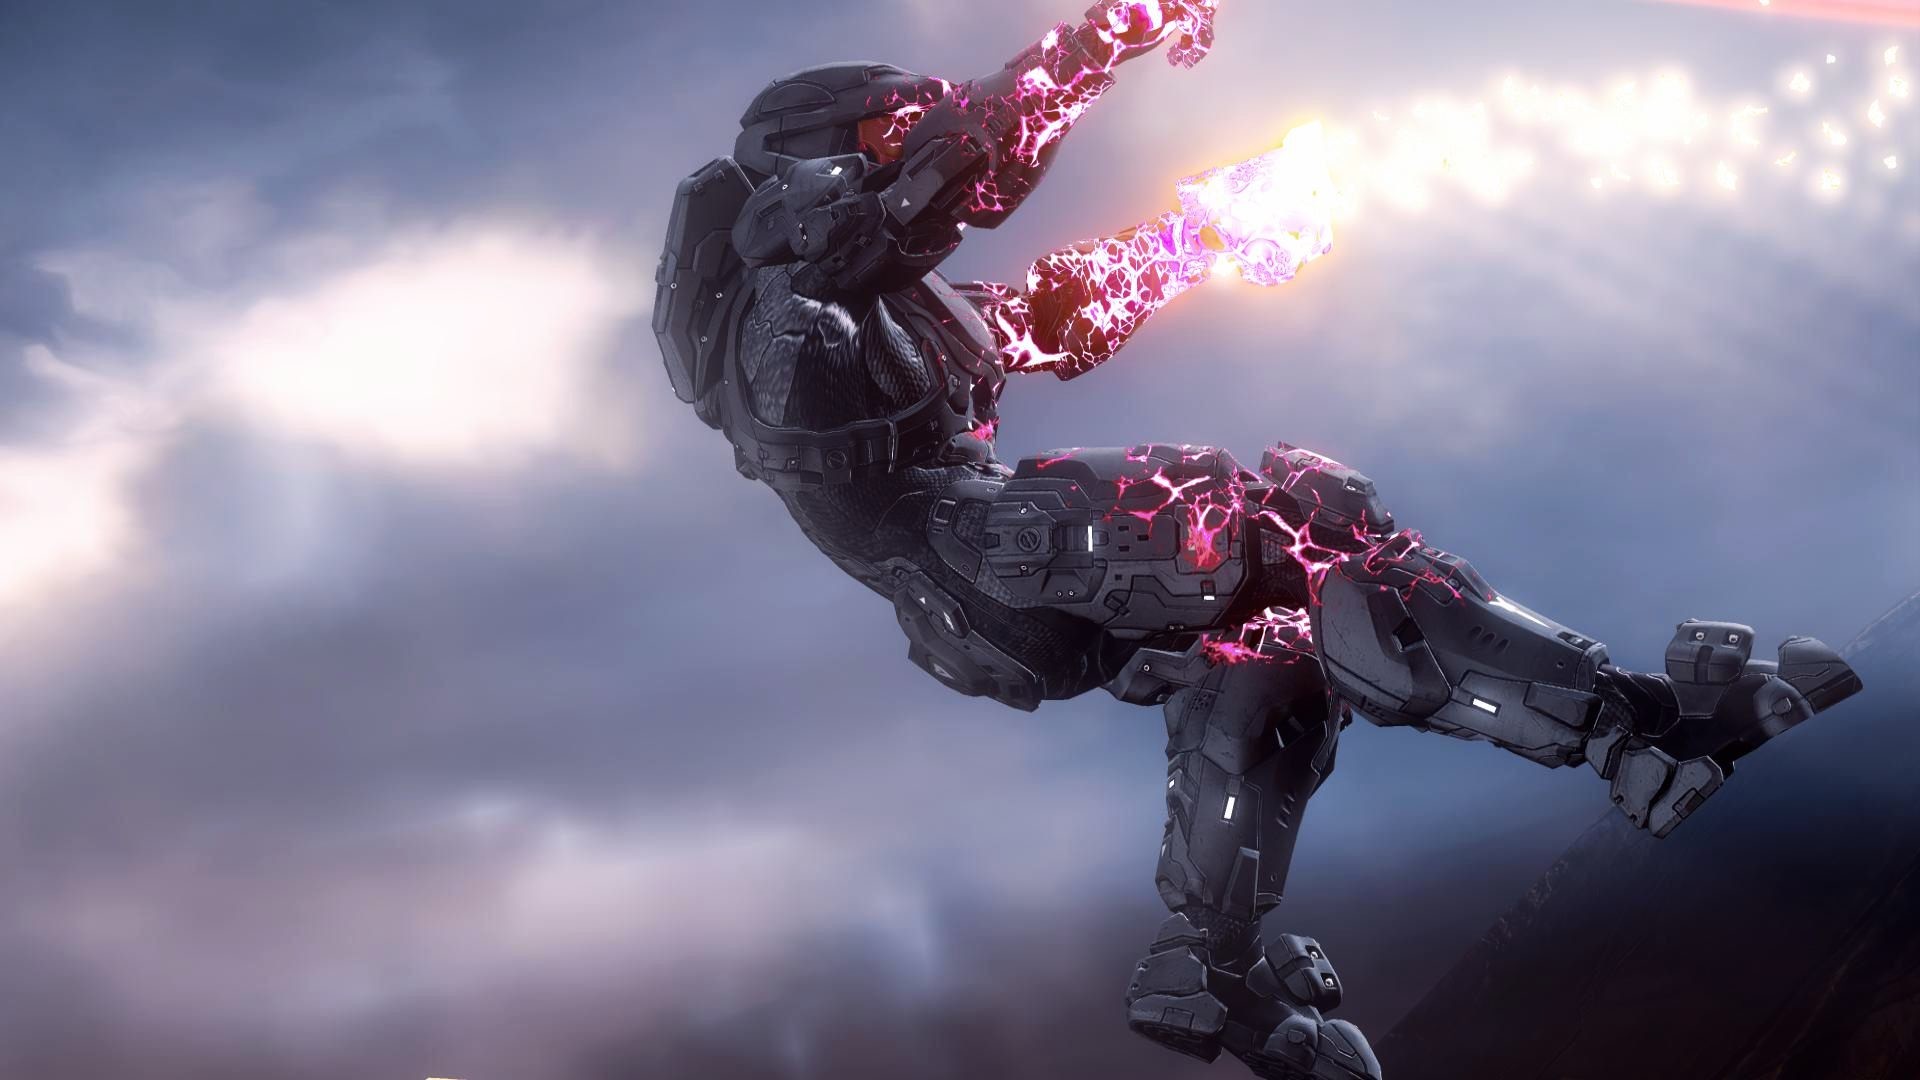 1920x1080 Collection of Awesome Halo Backgrounds on HDWallpapers 1920Ã1200 Halo  Wallpapers (28 Wallpapers)